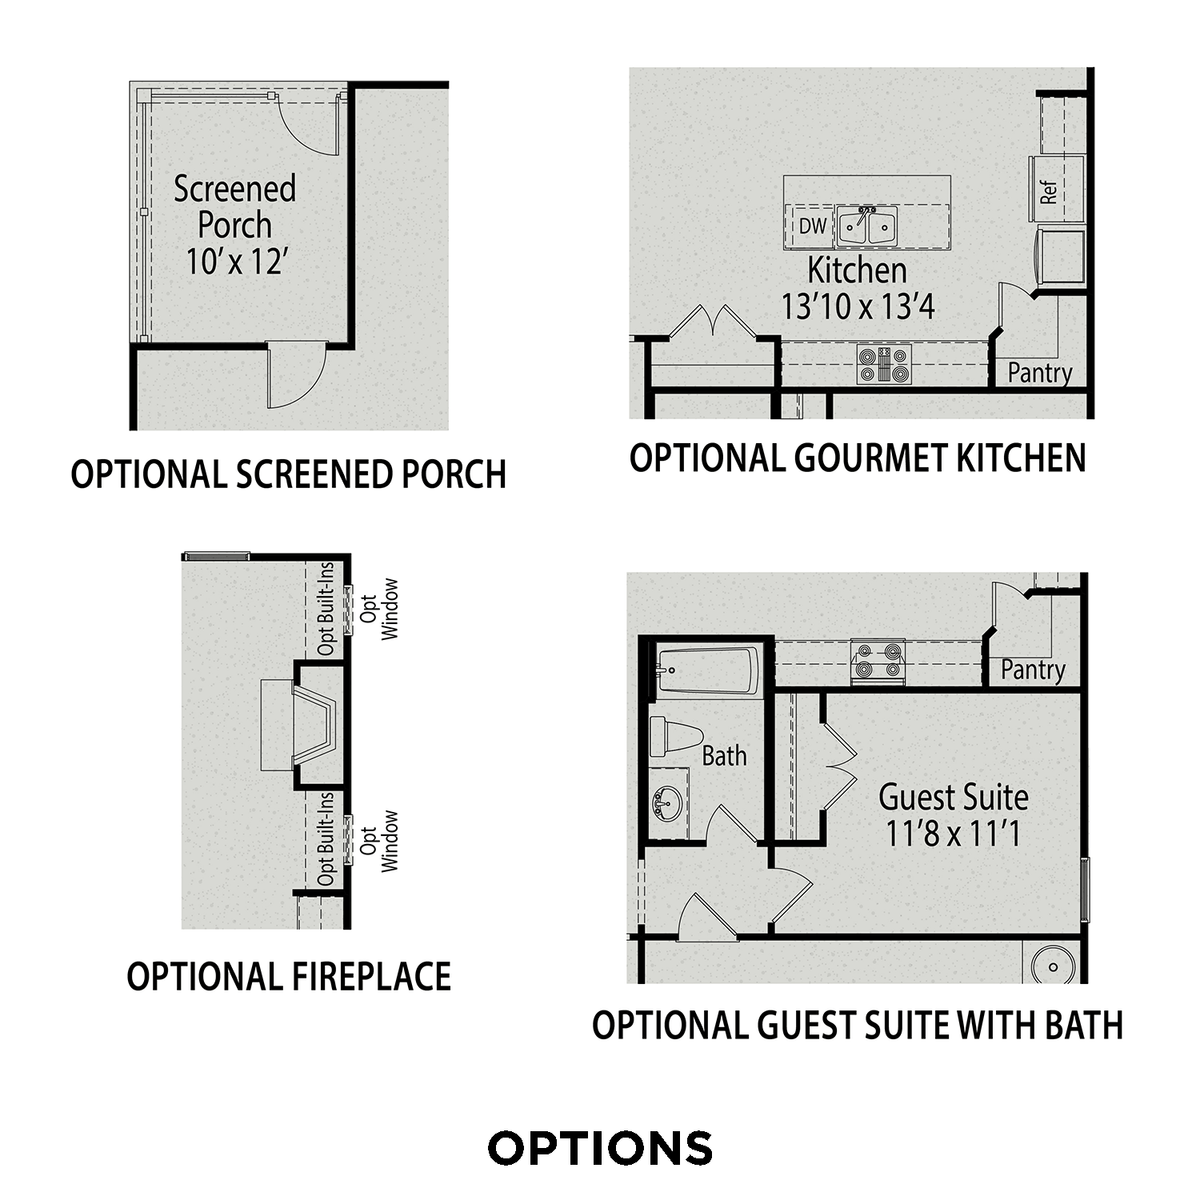 3 - The Preston A floor plan layout for 28 Fairwinds Drive in Davidson Homes' Gregory Village community.